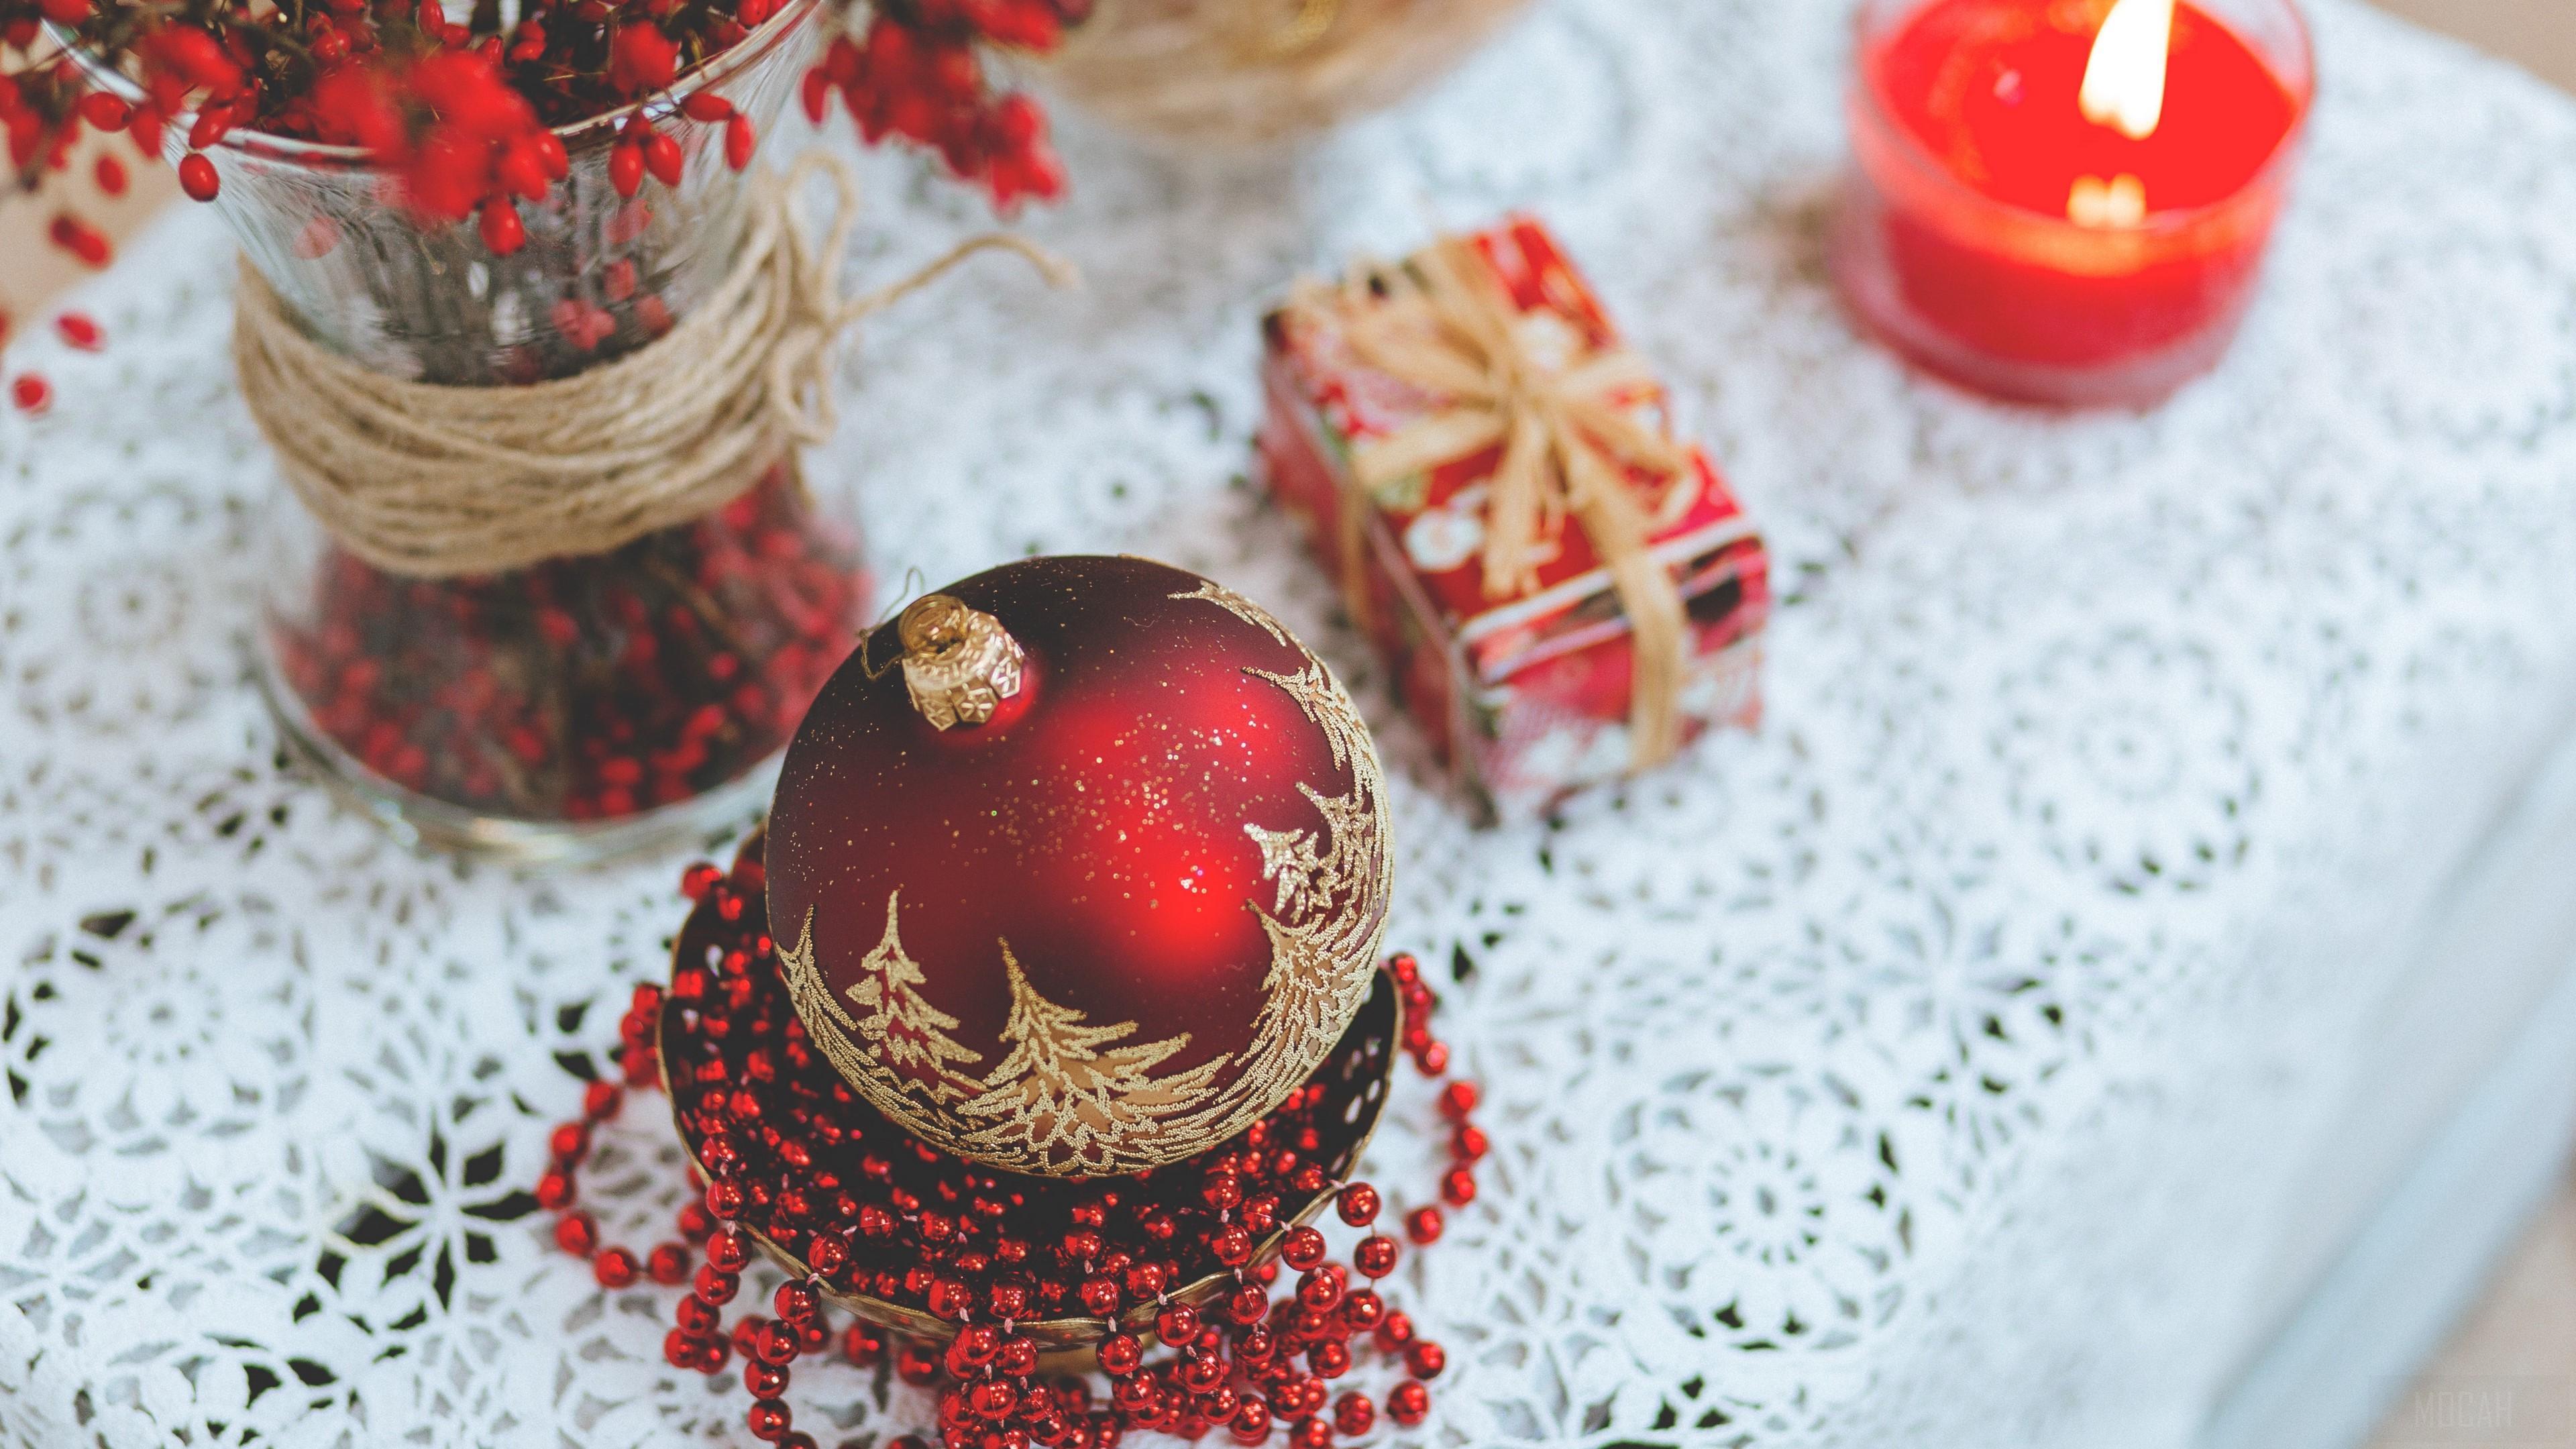 HD wallpaper, Gift 4K, Christmas Decorations, Candle, Ball